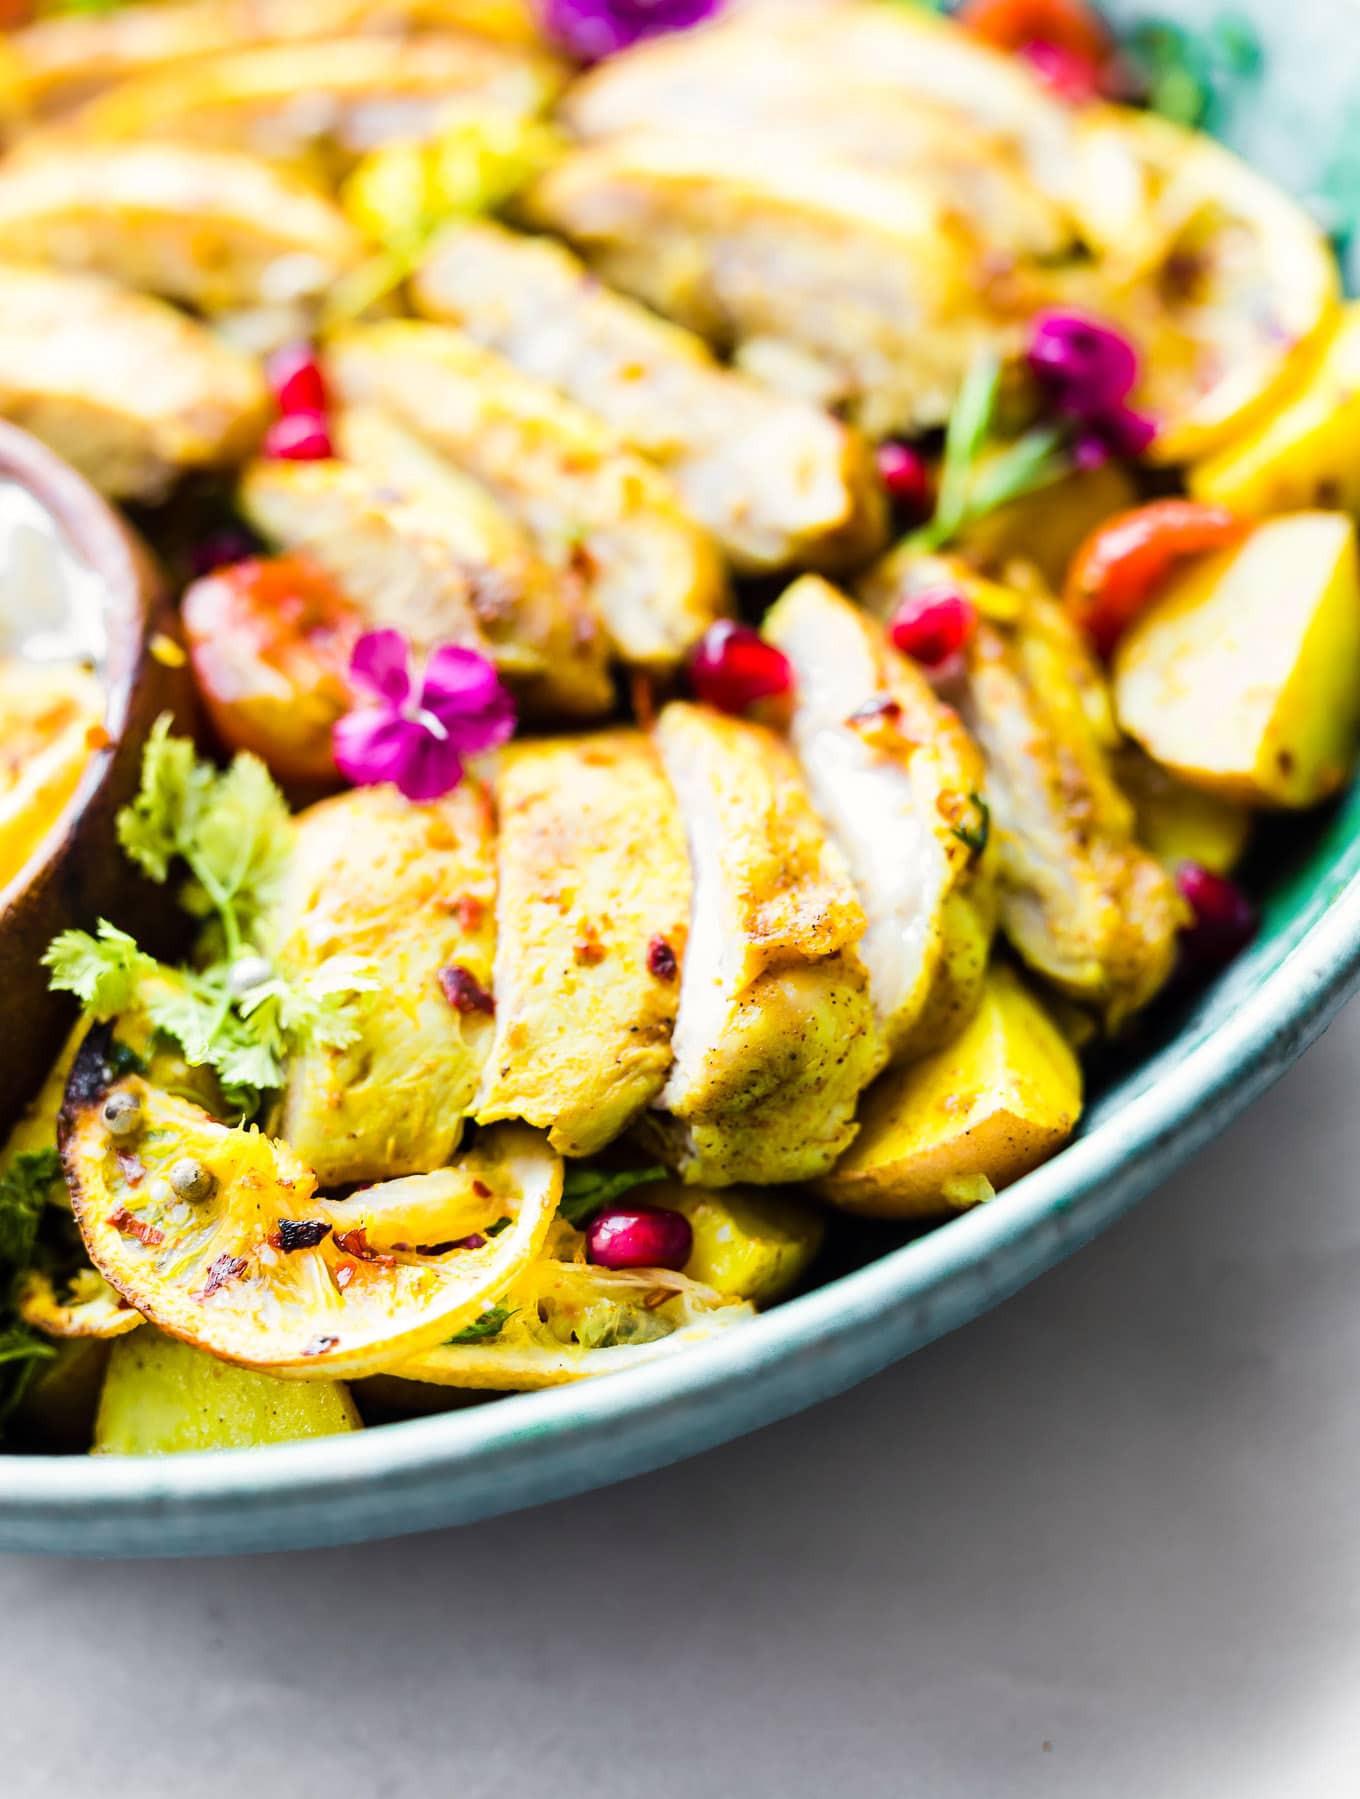 Pan roasted chicken thighs with Persian spices, a burst of lemon flavor and tender veggies! This Persian Spiced Pan Roasted Chicken is an easy one pan meal